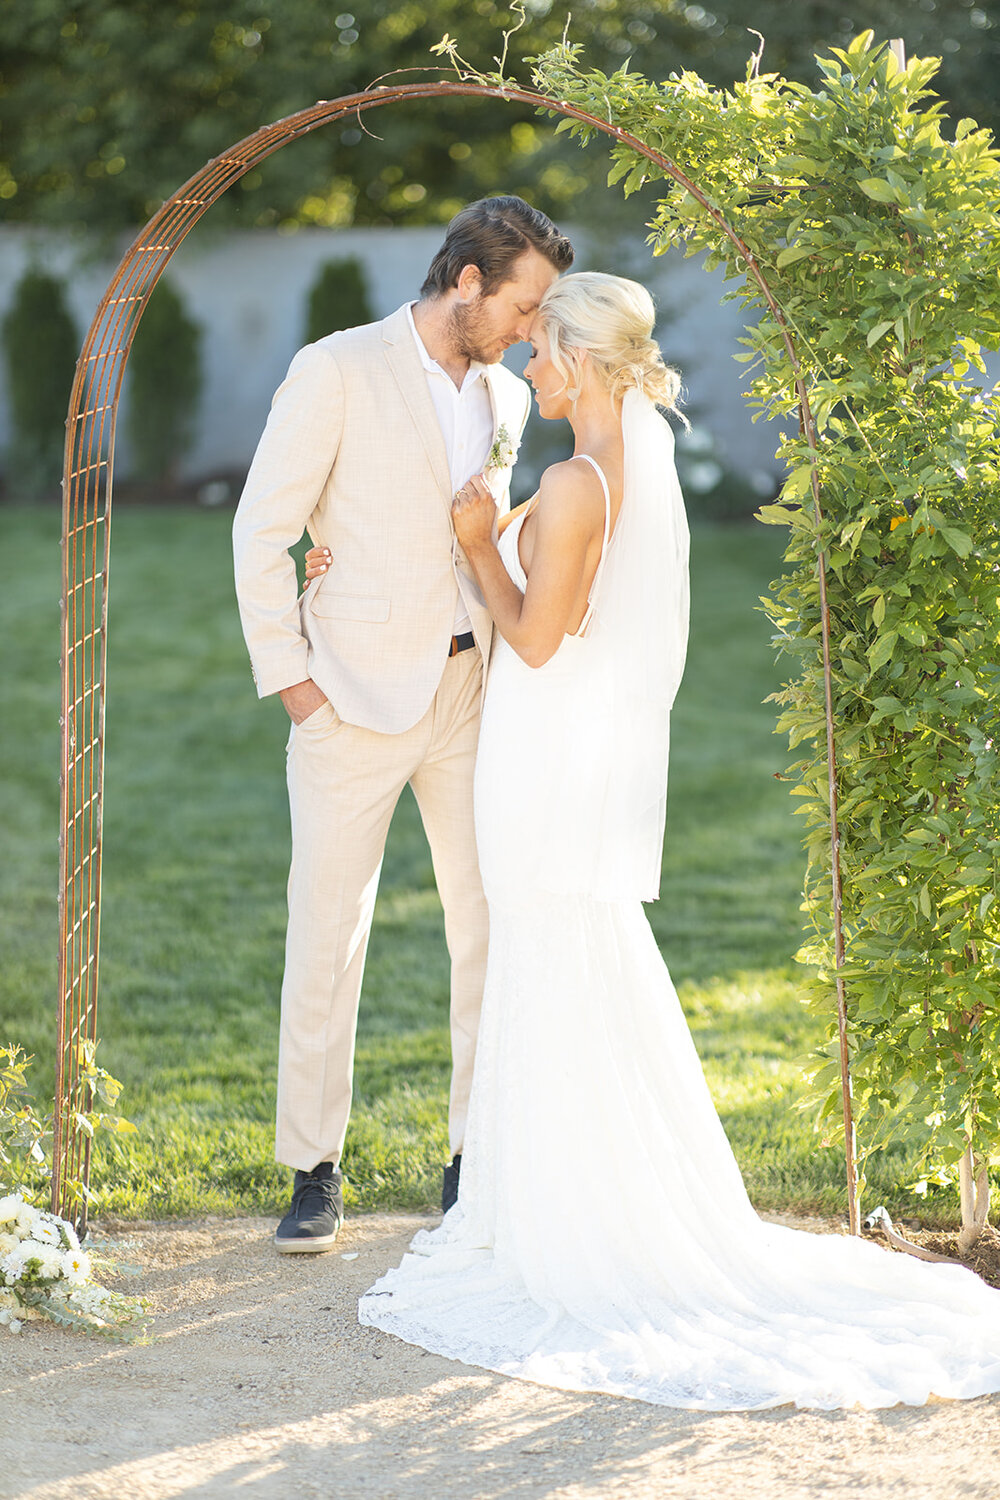 Kate and Parker on Renee Grace Bridal